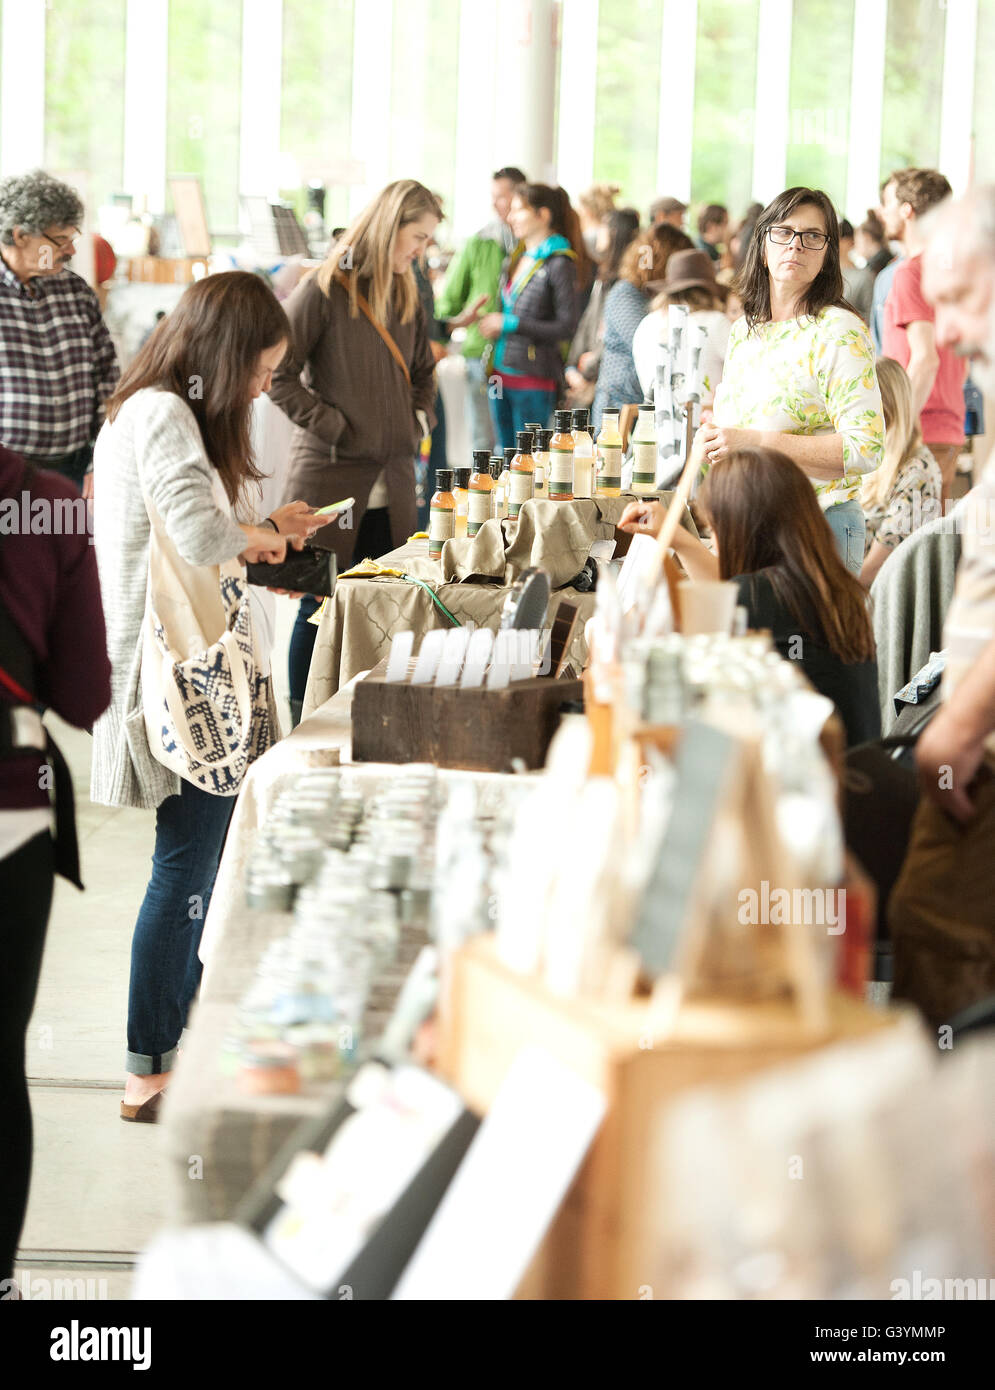 Crowds at the annual refresh market at the West Coast Railway Park.  Shopping at a trendy family craft market.  Squamish BC, Canada., Stock Photo